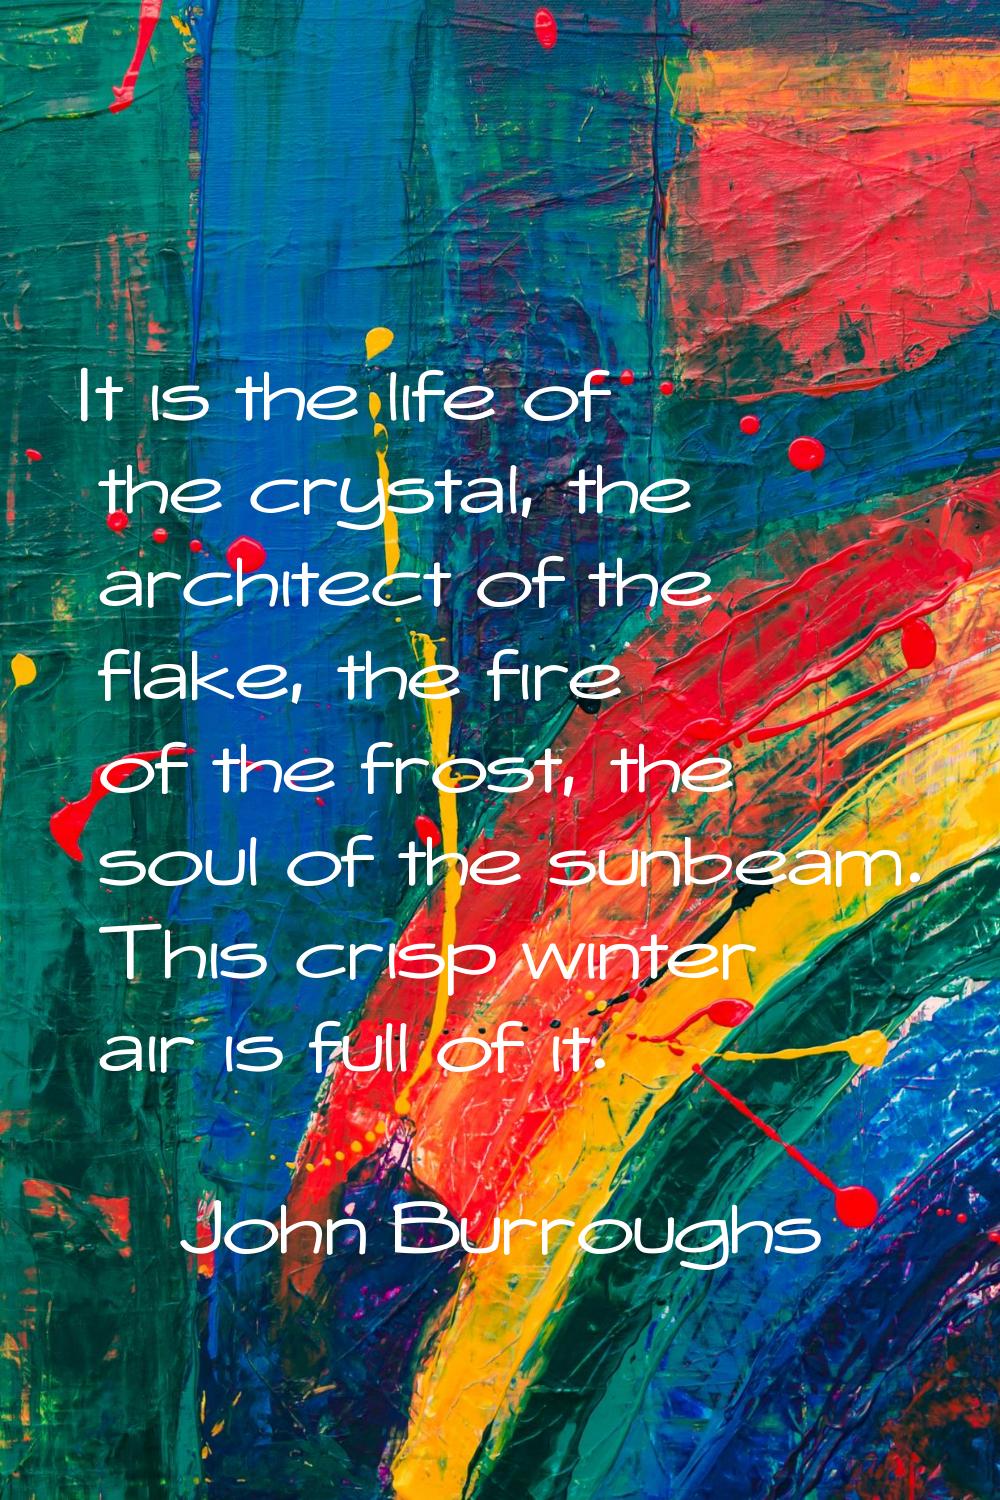 It is the life of the crystal, the architect of the flake, the fire of the frost, the soul of the s